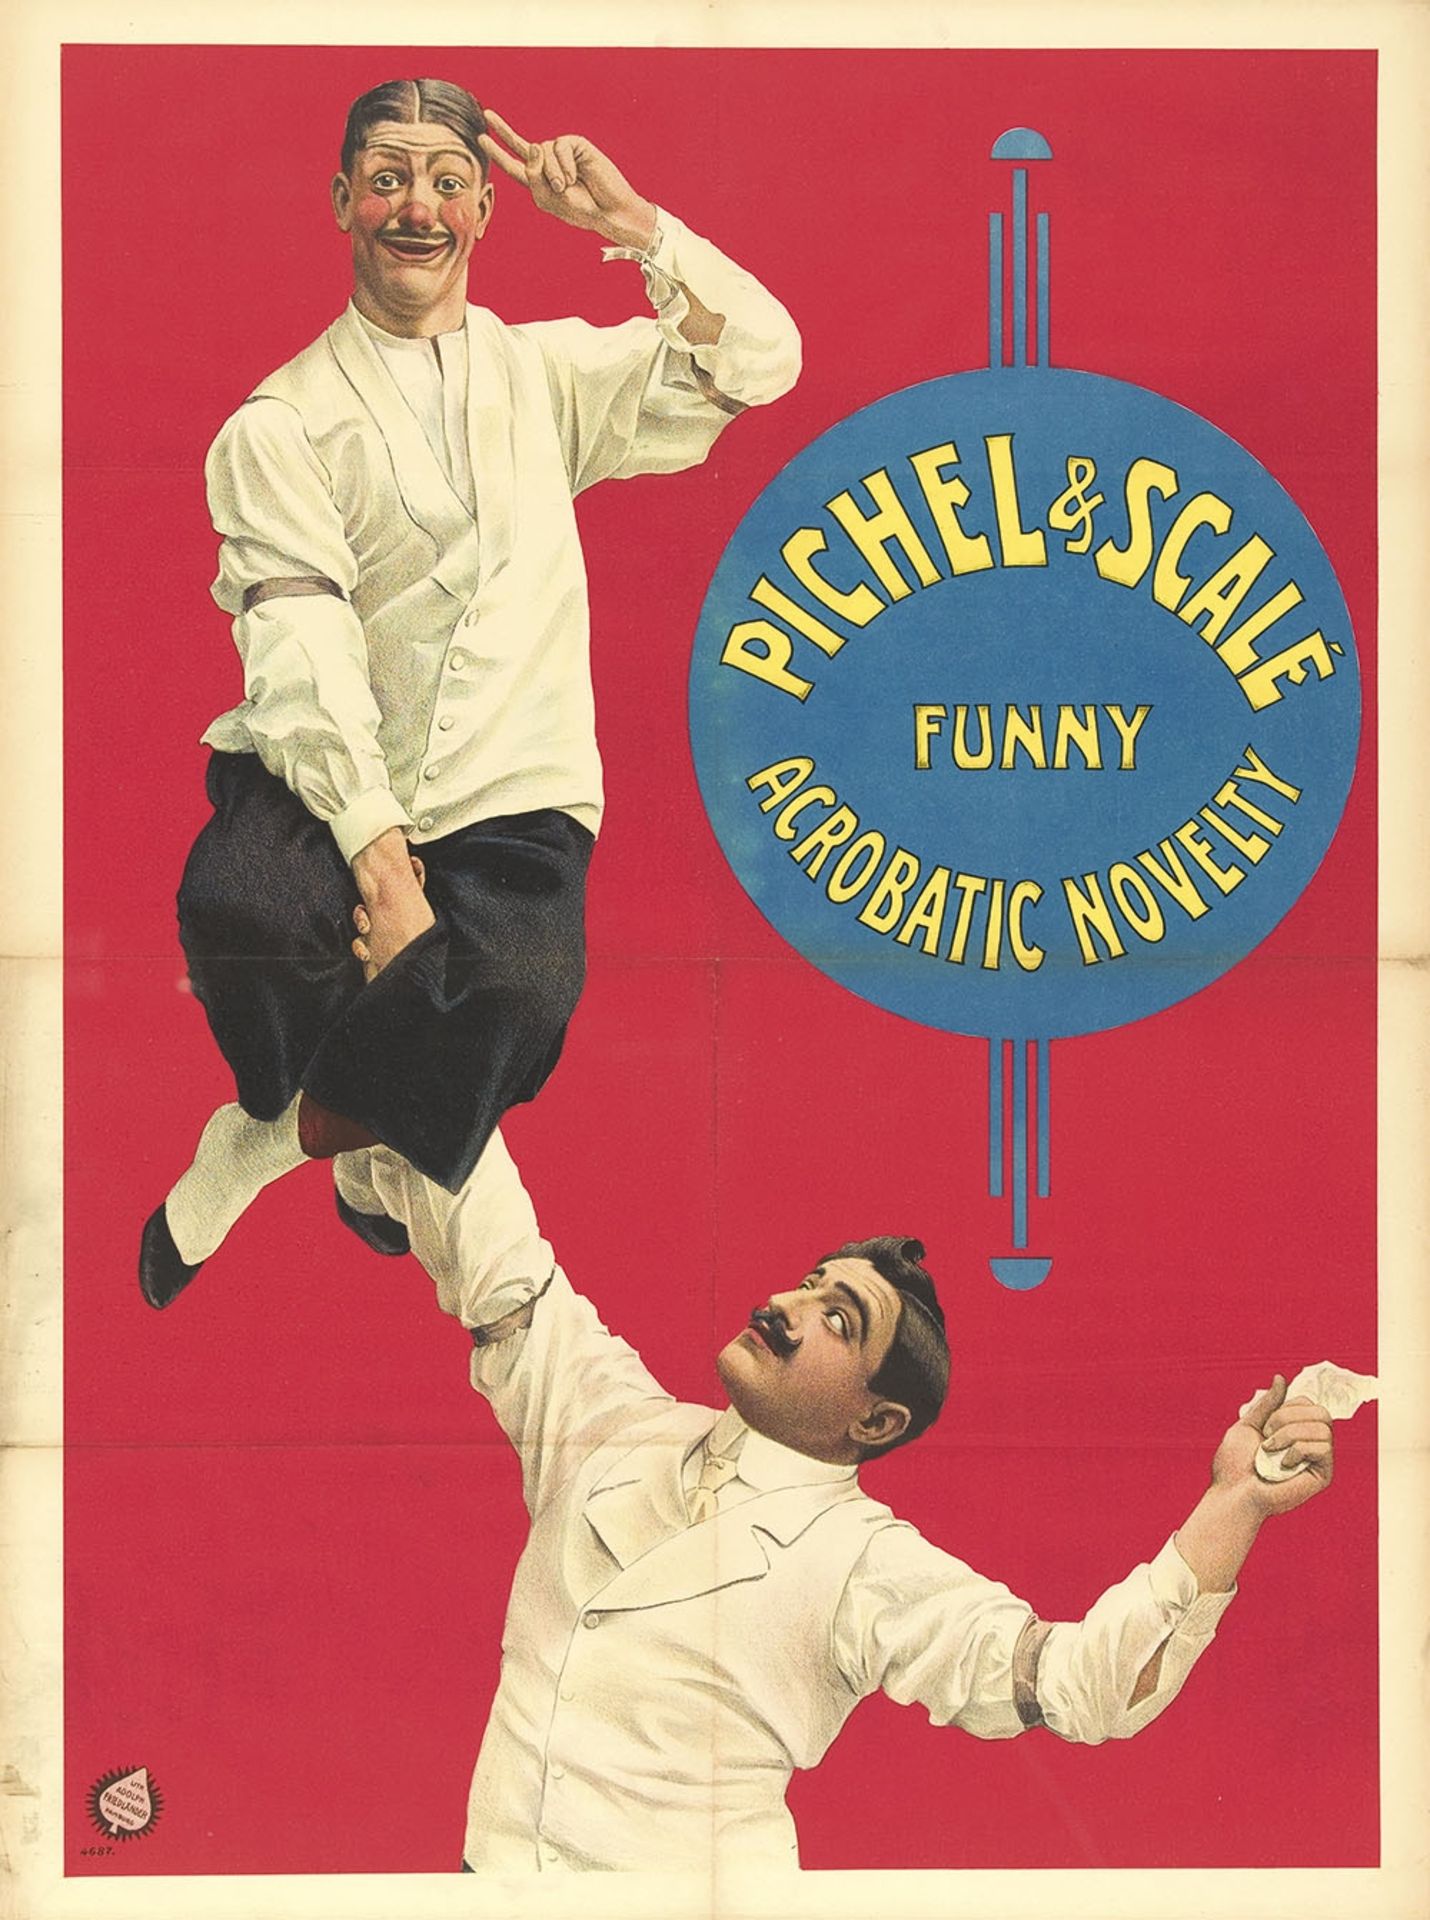 Pichel & Scalé, funny acrobatic novelty - Image 7 of 7